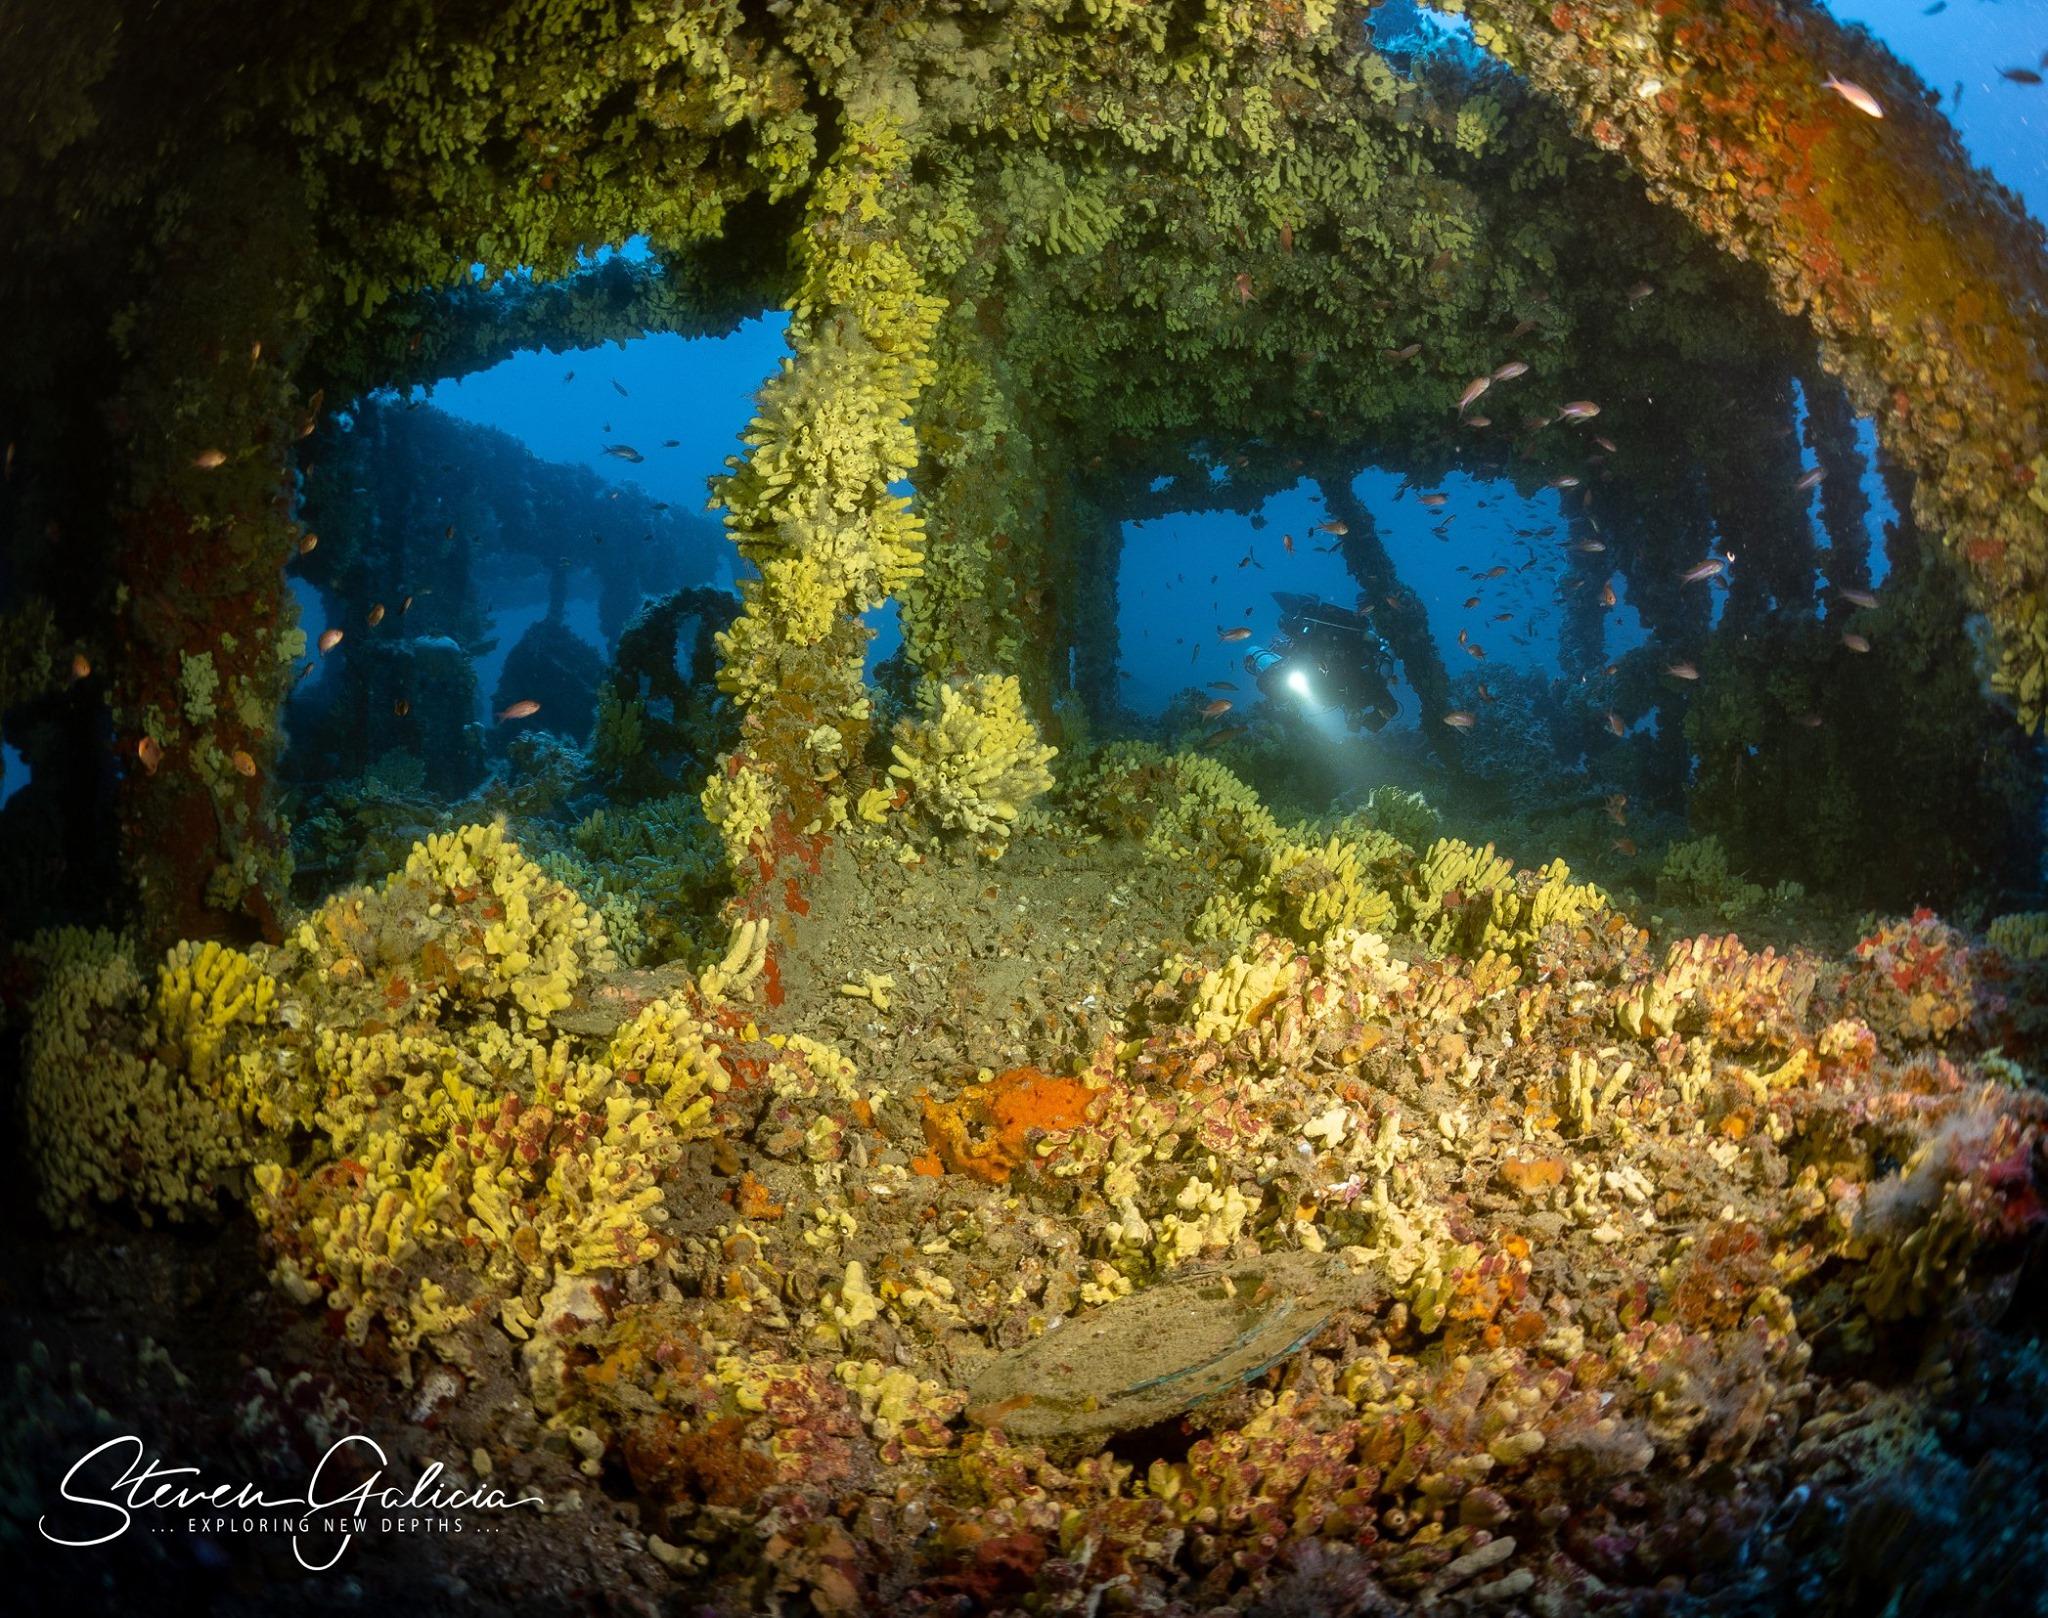 Amazing marine encrustation after 102 years on the seabed [Steven Galicia]